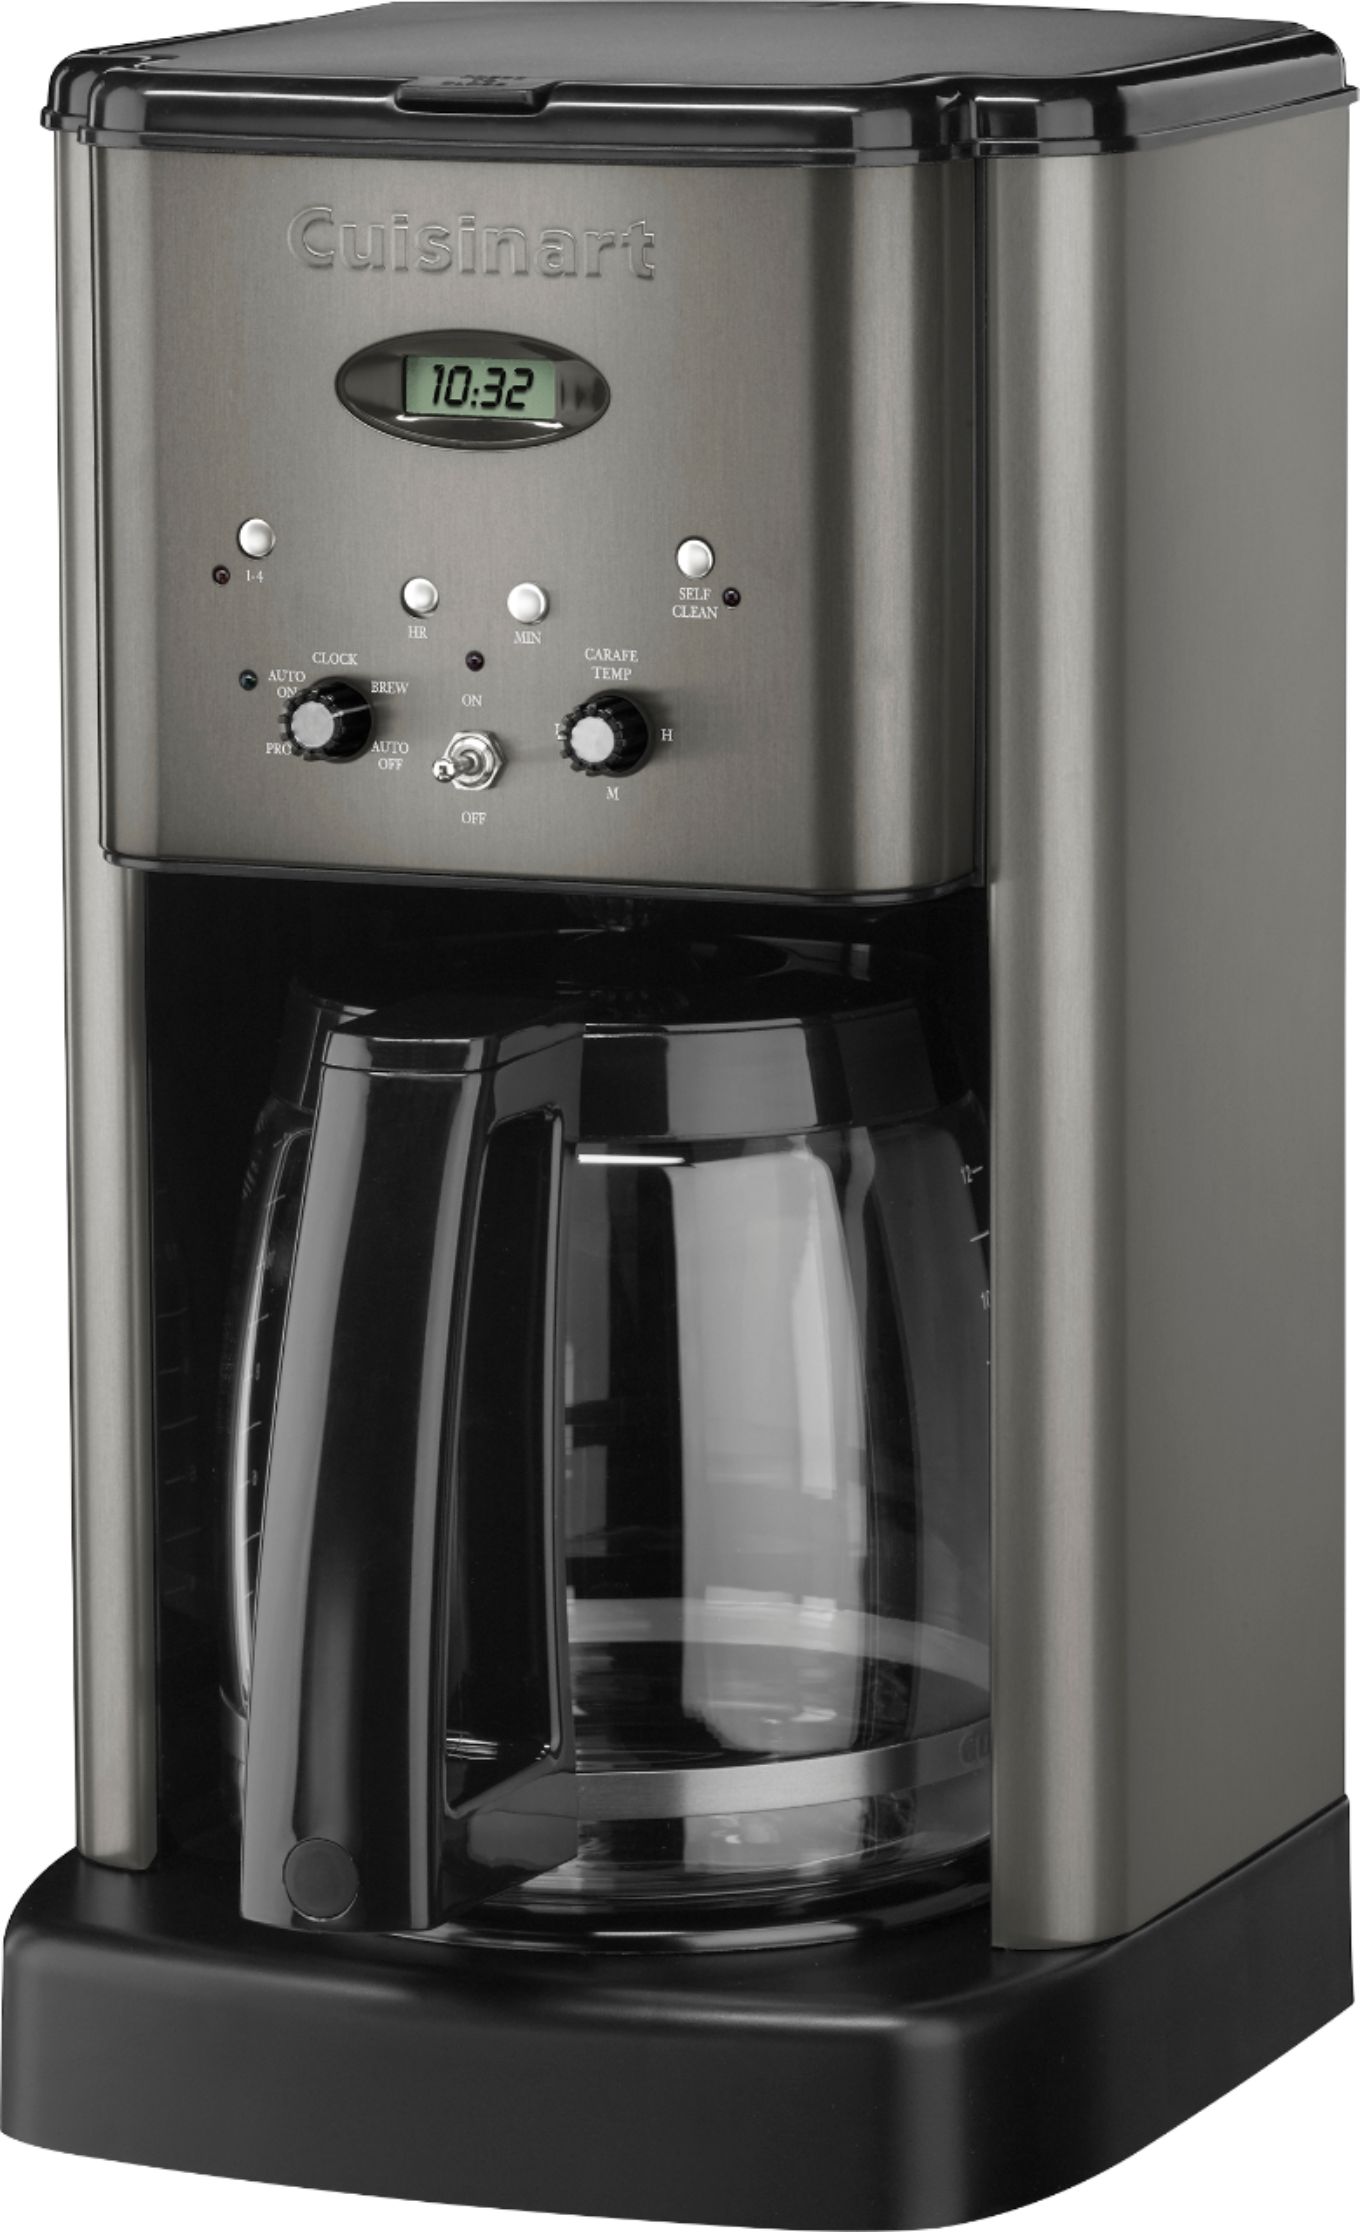 Gevalia 12 Cup coffee maker w/ extra pot - general for sale - by